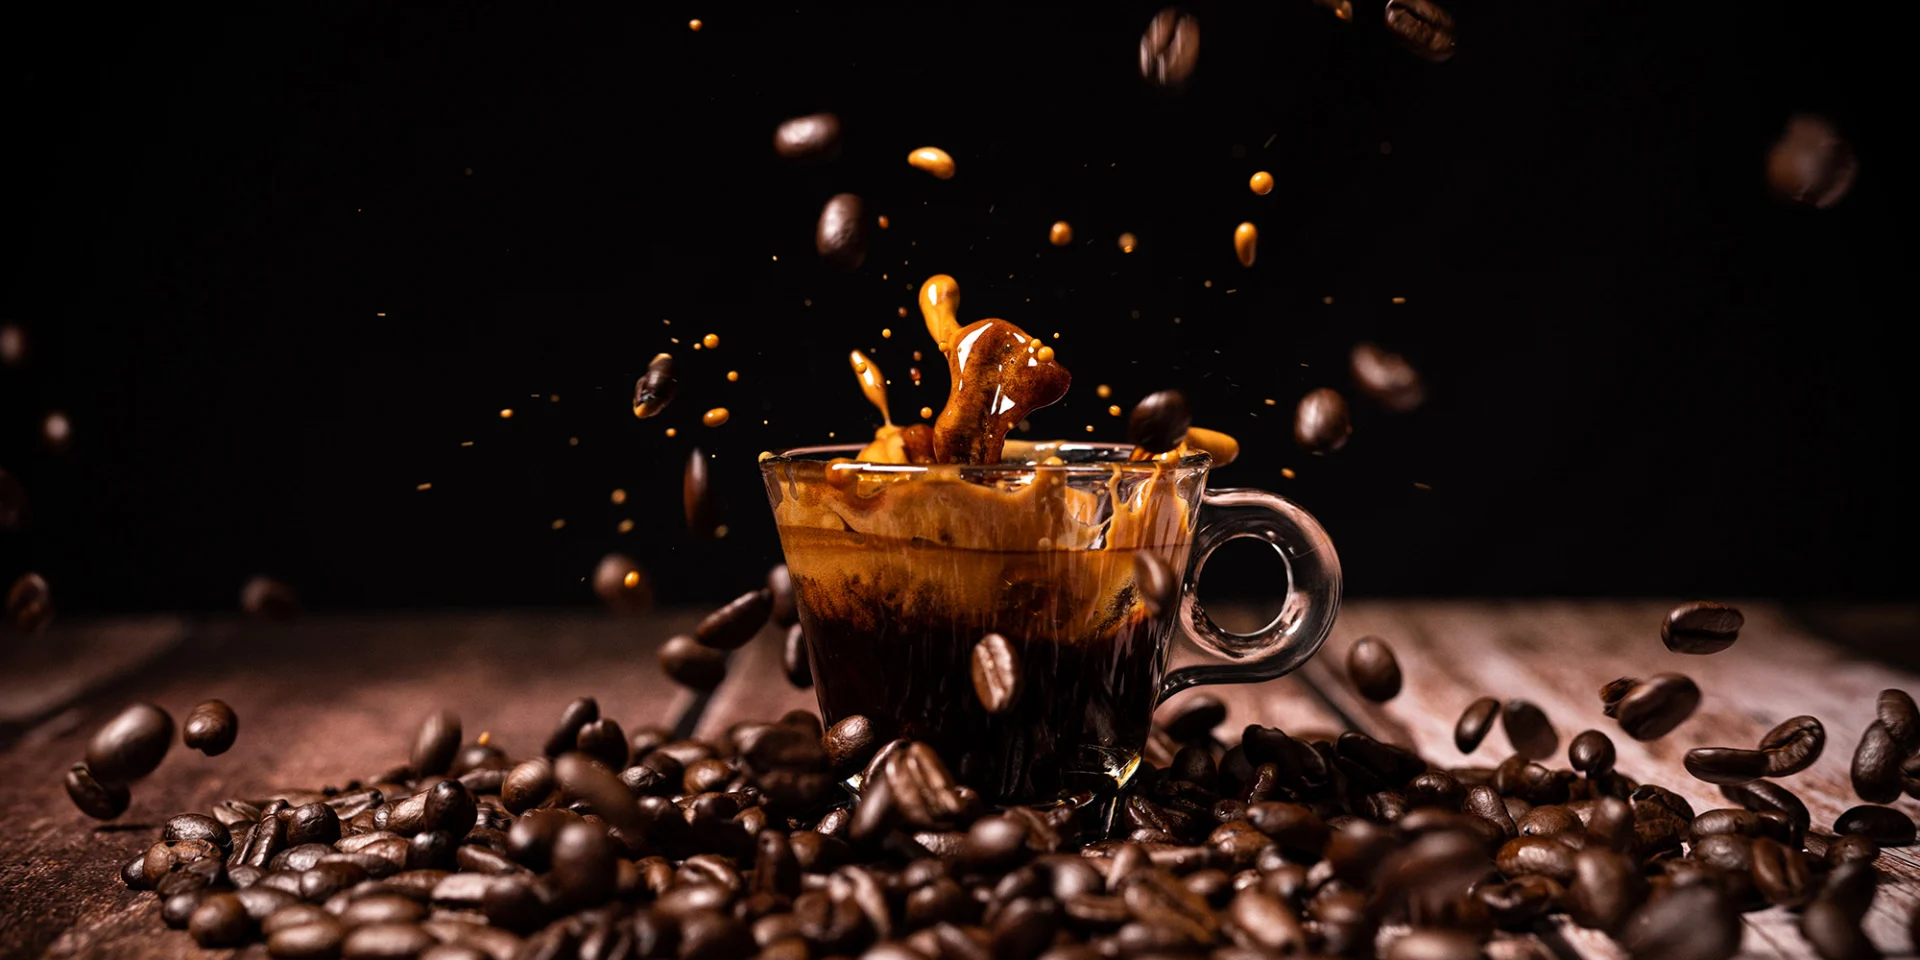 An espresso cup with espresso stands on coffee beans against a dark background.